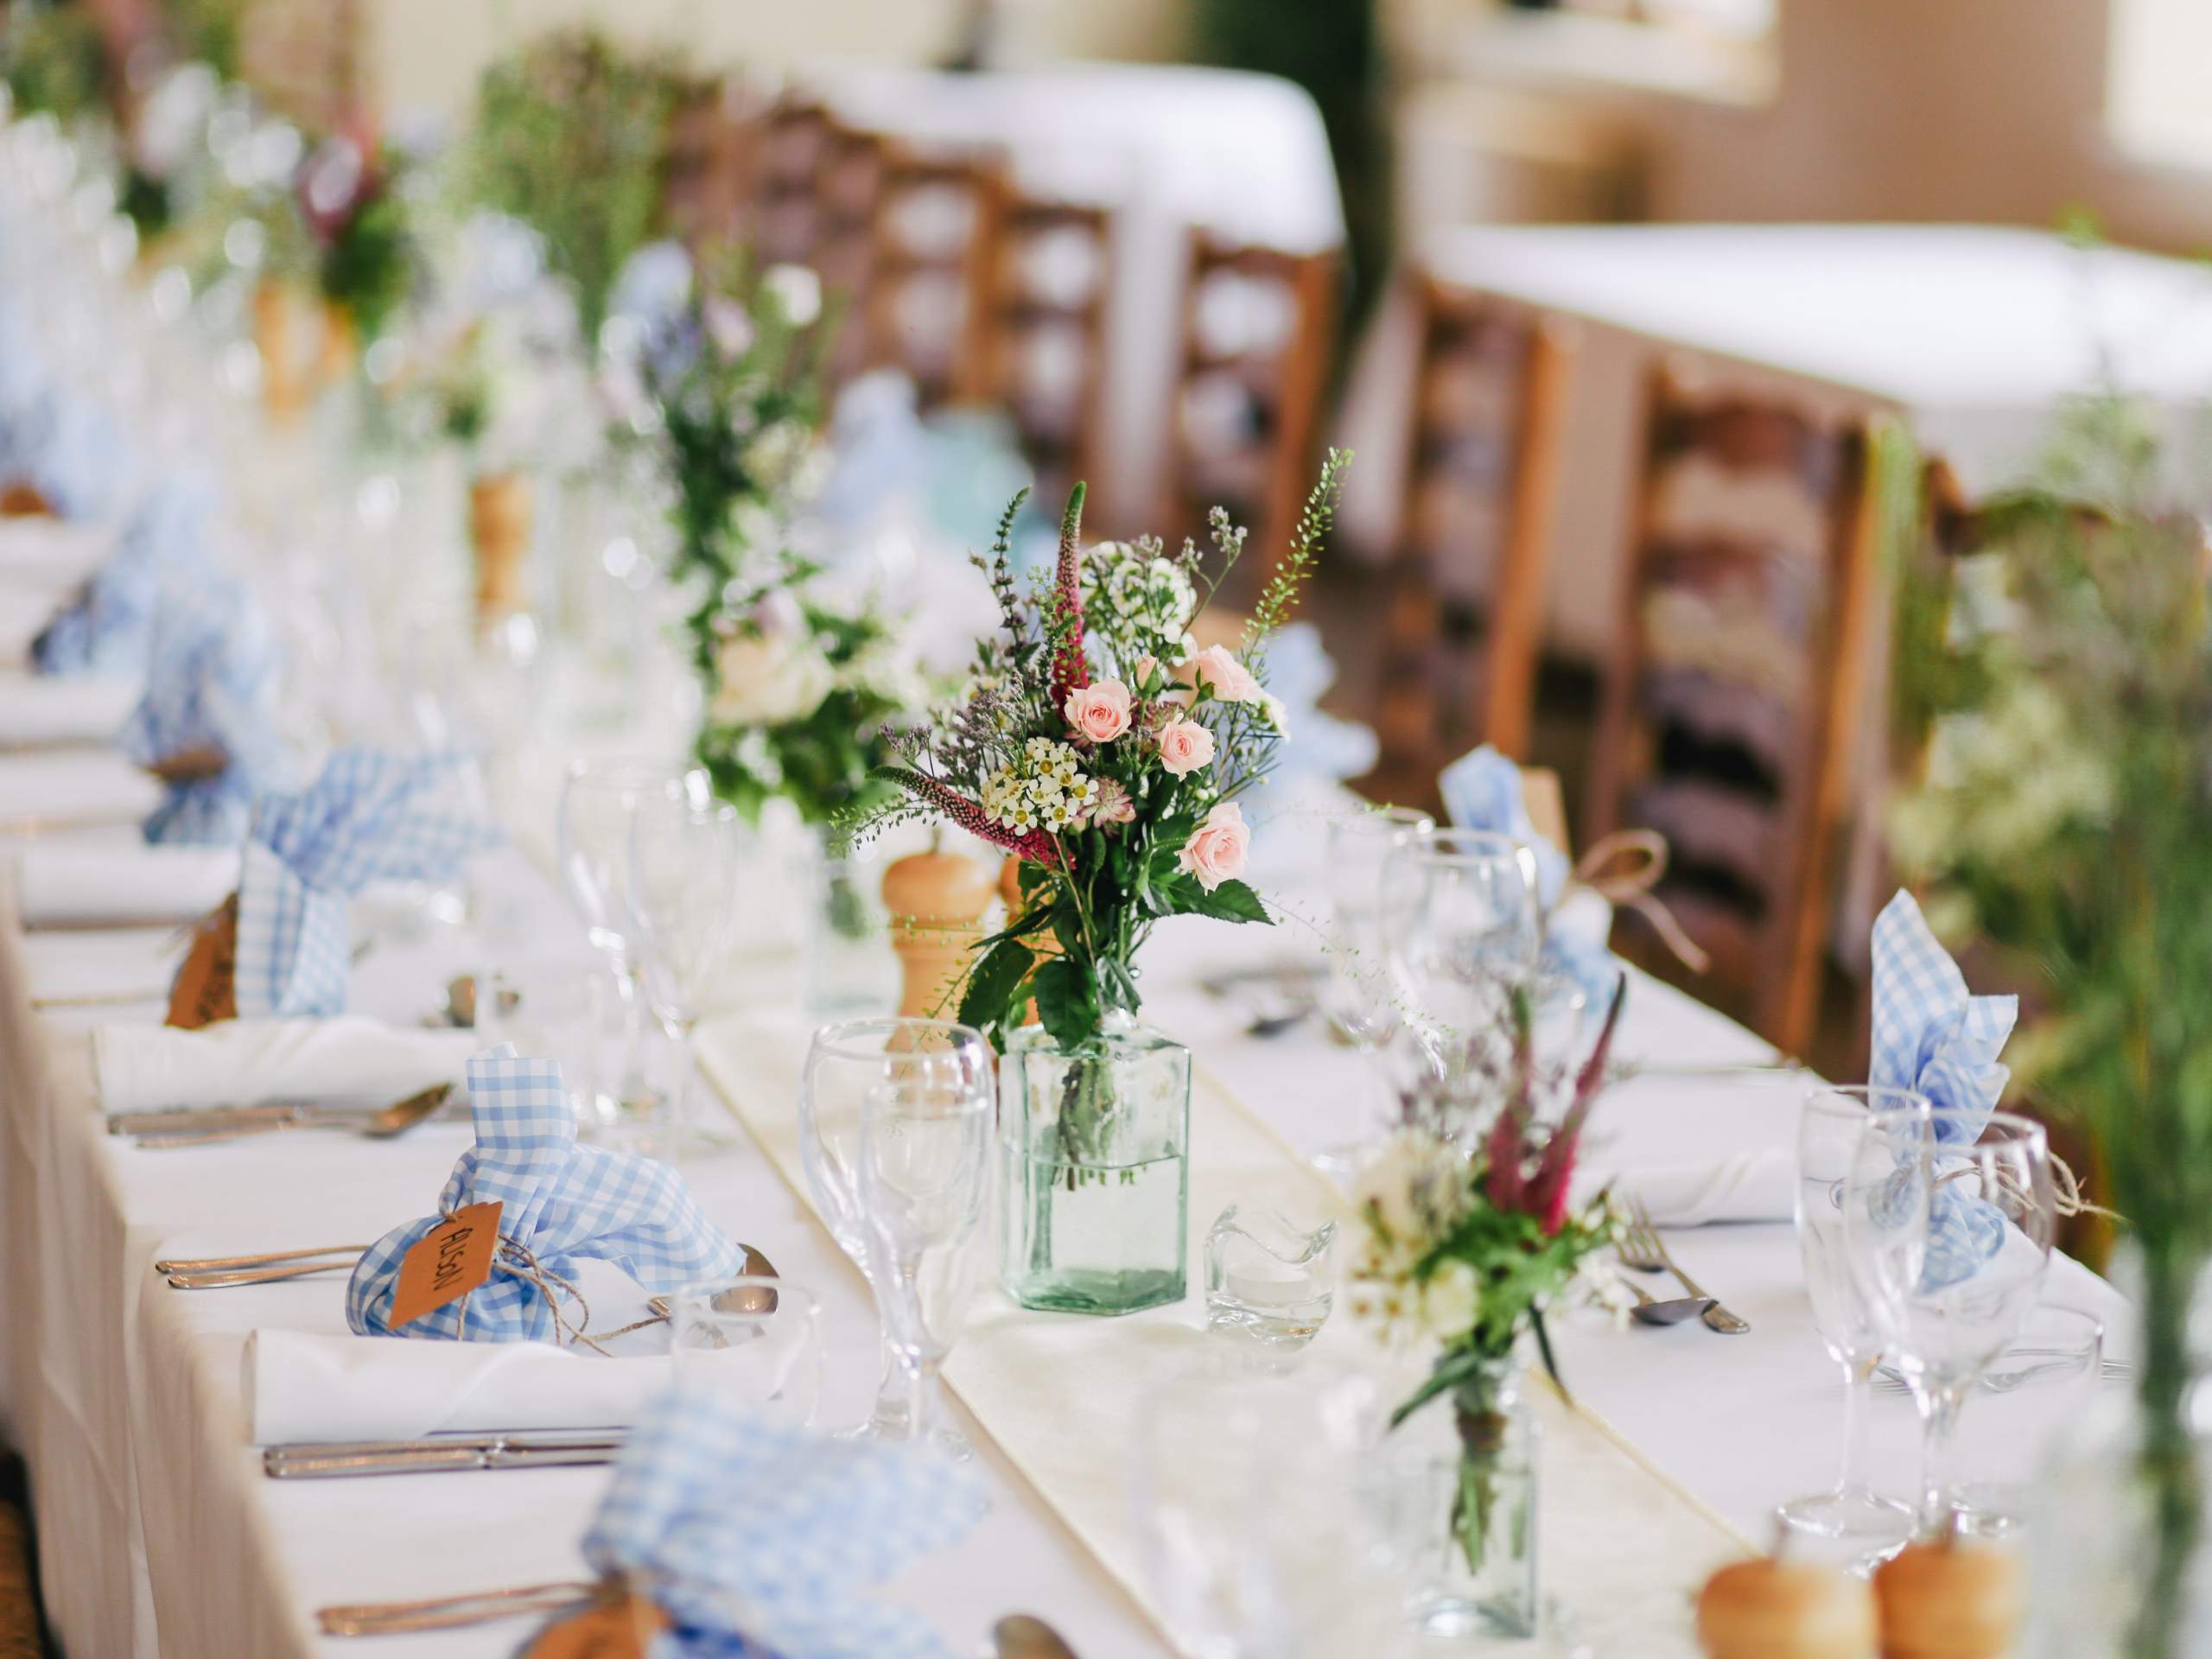 Where to host your wedding in Durban Eat Out